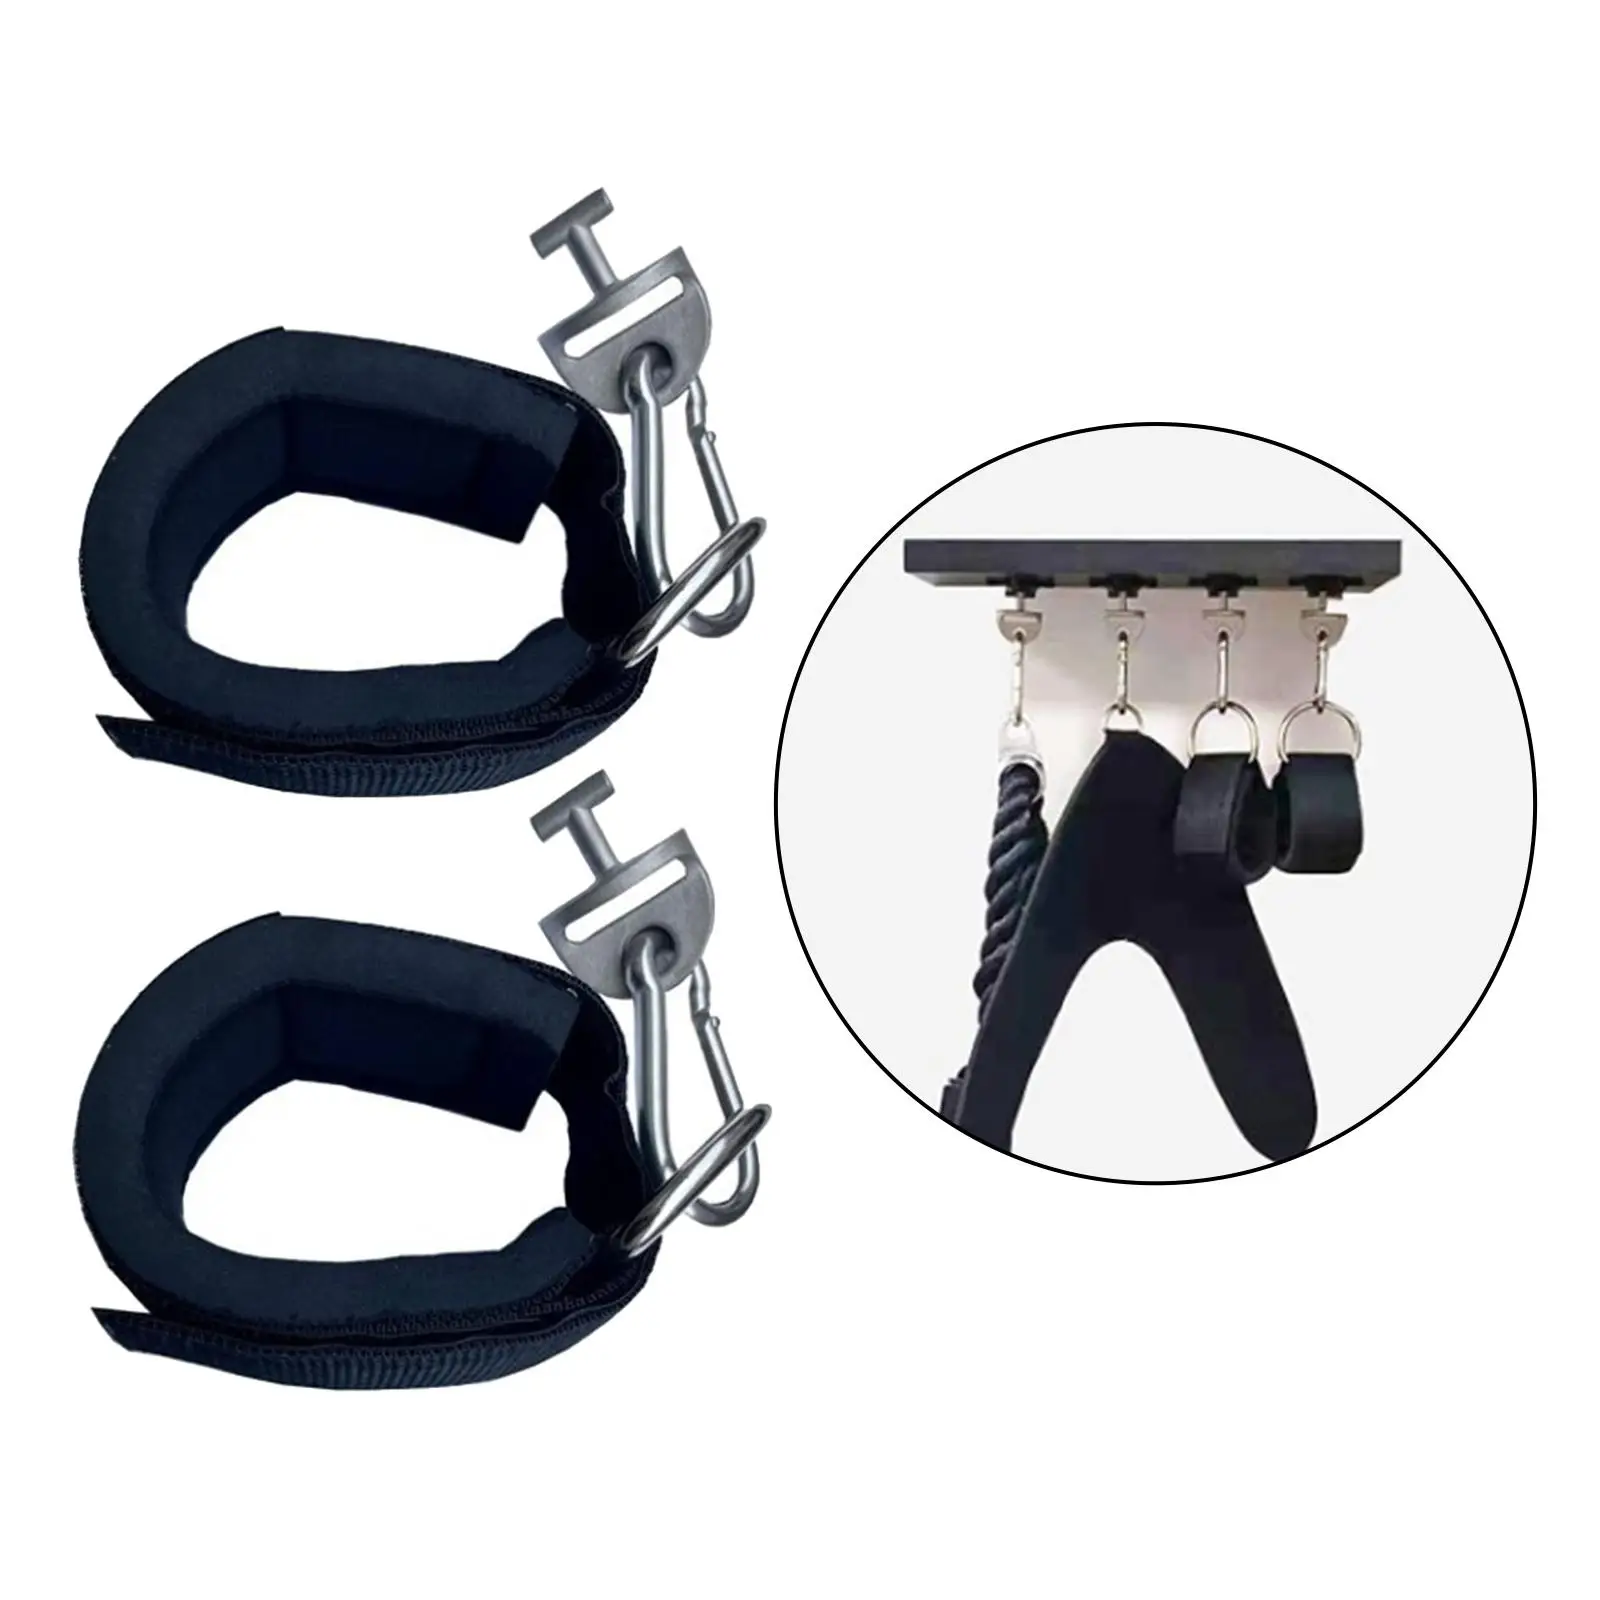 Ankle Straps for Tonal Cable Machine Foot Support Exercise Machine Attachments Ankle Cuff for Glute Kickbacks Leg Curls Home Gym